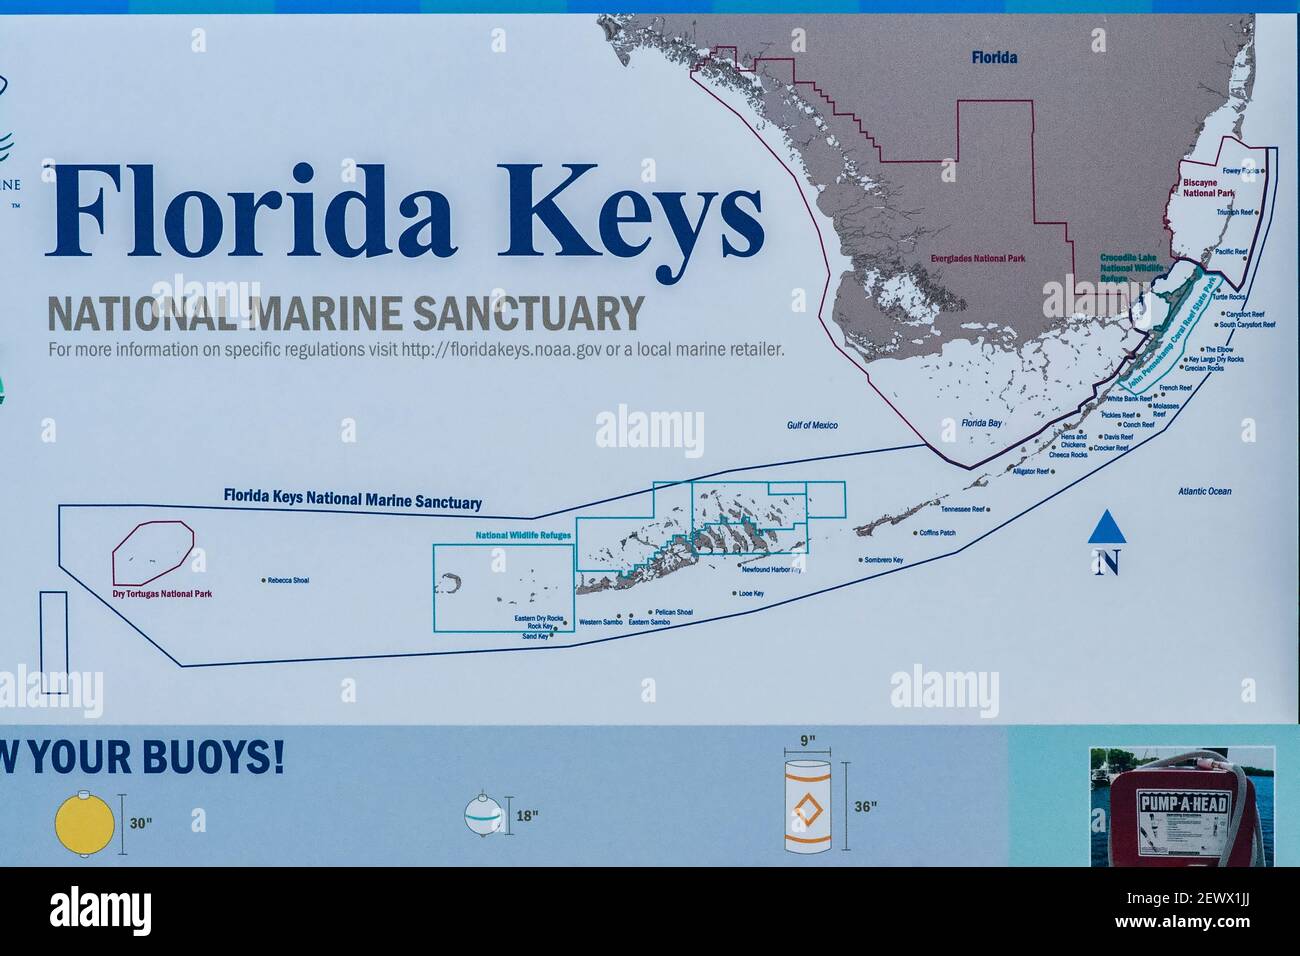 A sign showing a map of the Florida Keys National Marine Sanctuary at the Miami-Dade Homestead Park and Herbert Hoover Marina in South Florida. Stock Photo